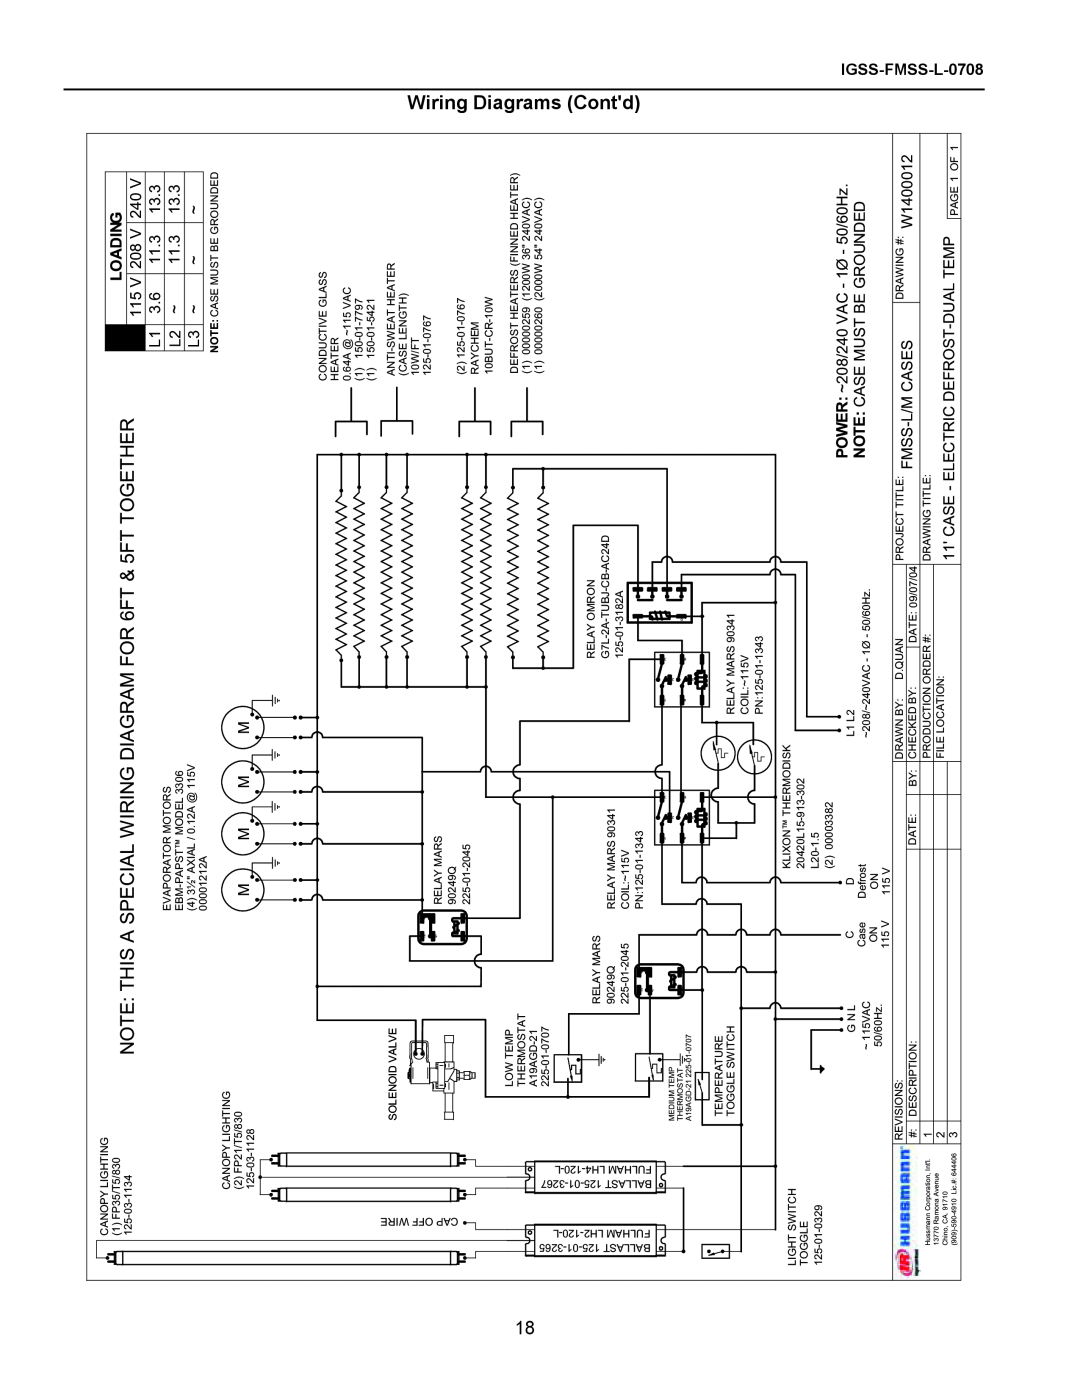 hussman FMSS-L Contd, Wiring Diagrams, NOTE THIS A SPECIAL WIRING DIAGRAM FOR 6FT & 5FT TOGETHER, Loading, Solenoid Valve 